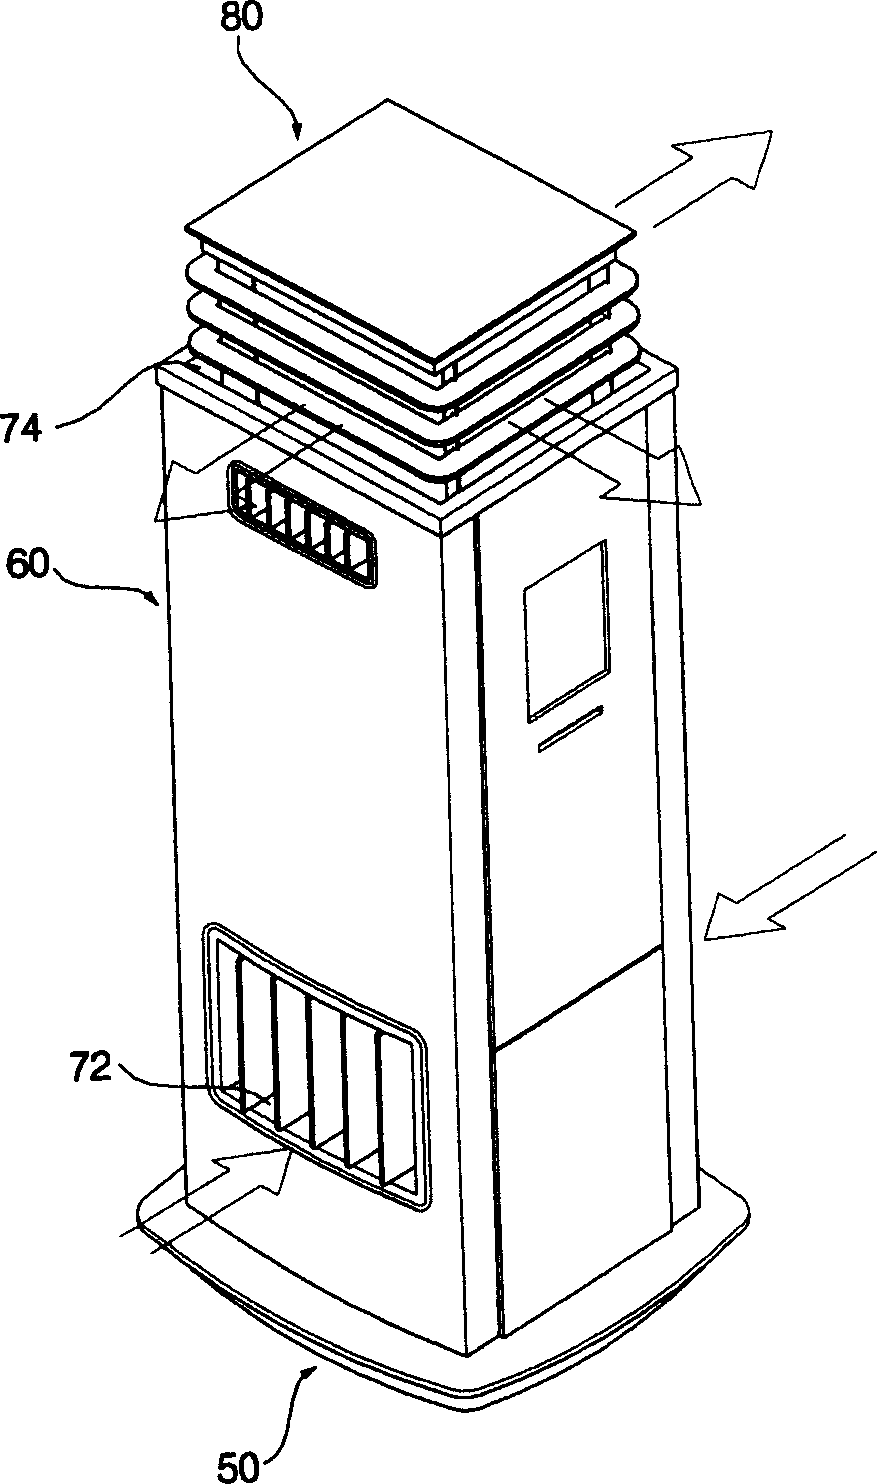 Lift device of outlet assembly of air conditioner